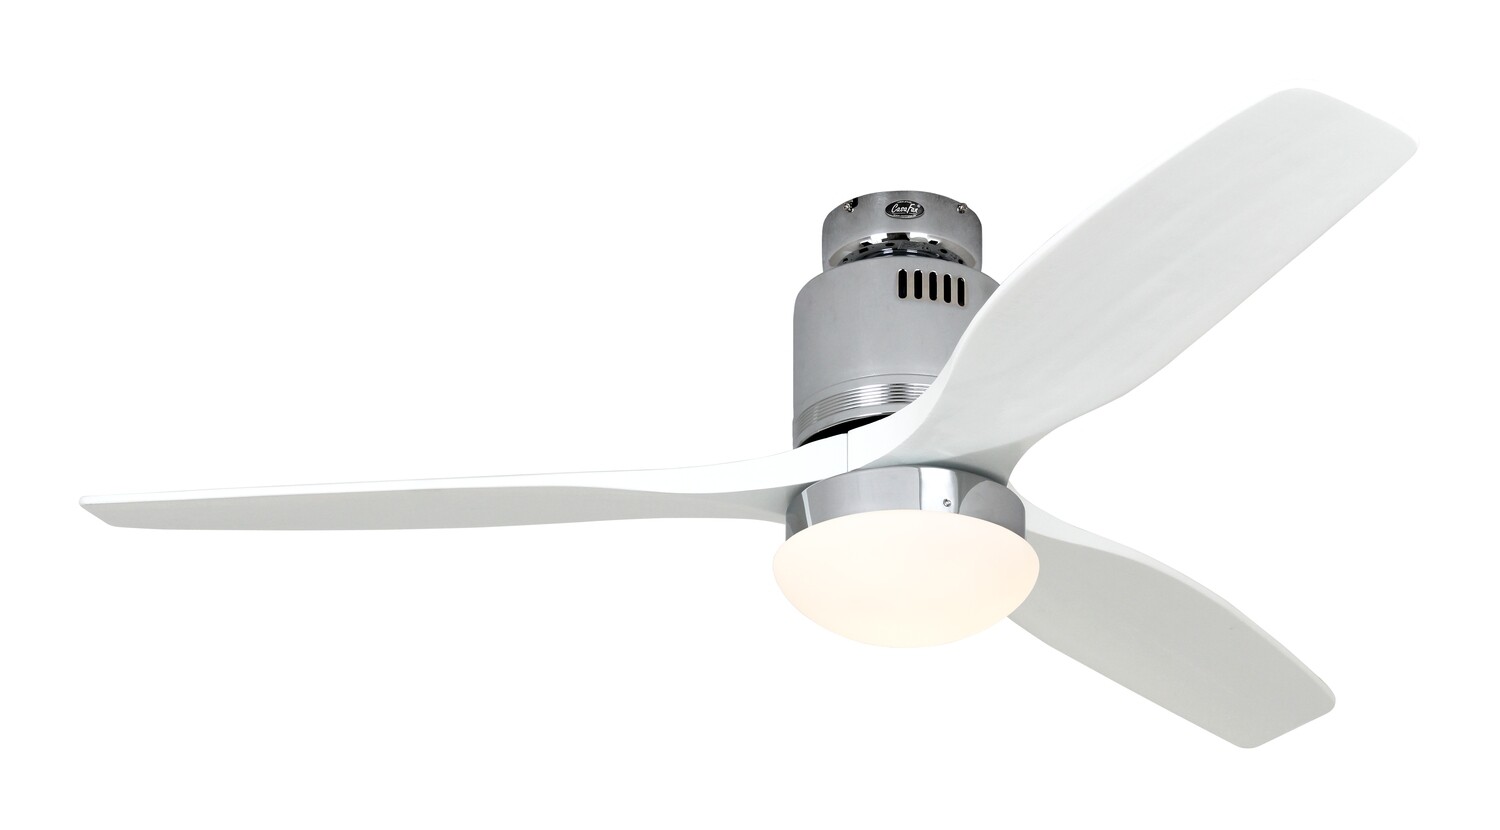 AERODYNAMIX ECO CH energy saving ceiling fan by CASAFAN Ø132 with light kit and remote control included - Polished Chrome / White